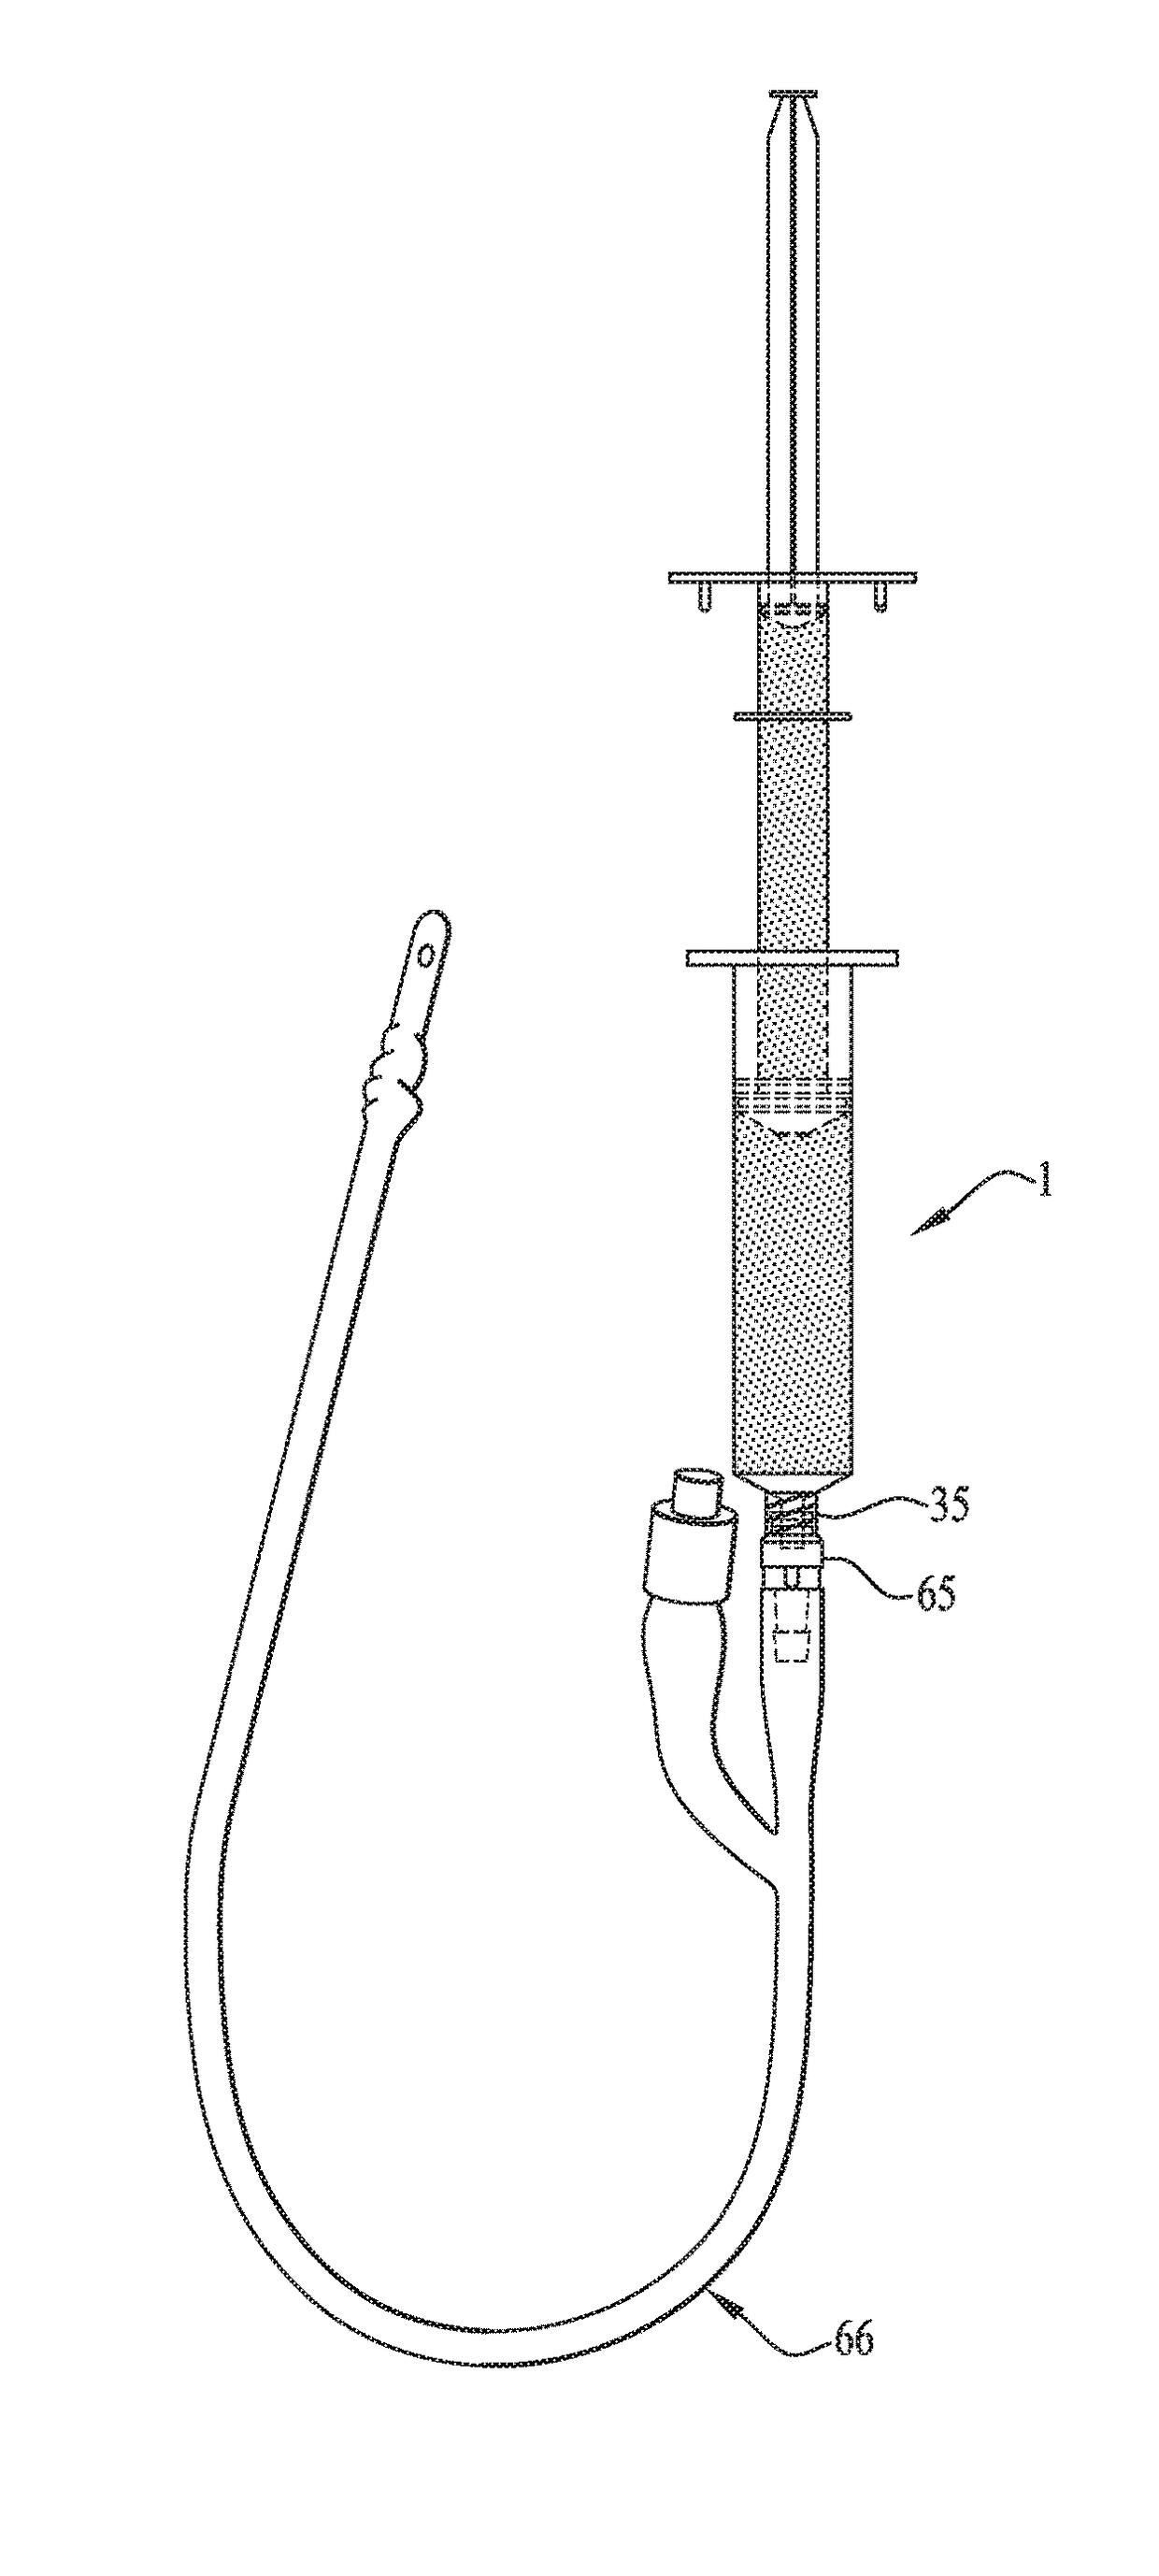 Syringe assembly for withdrawing two separate portions of fluid following a single engagement with fluid port